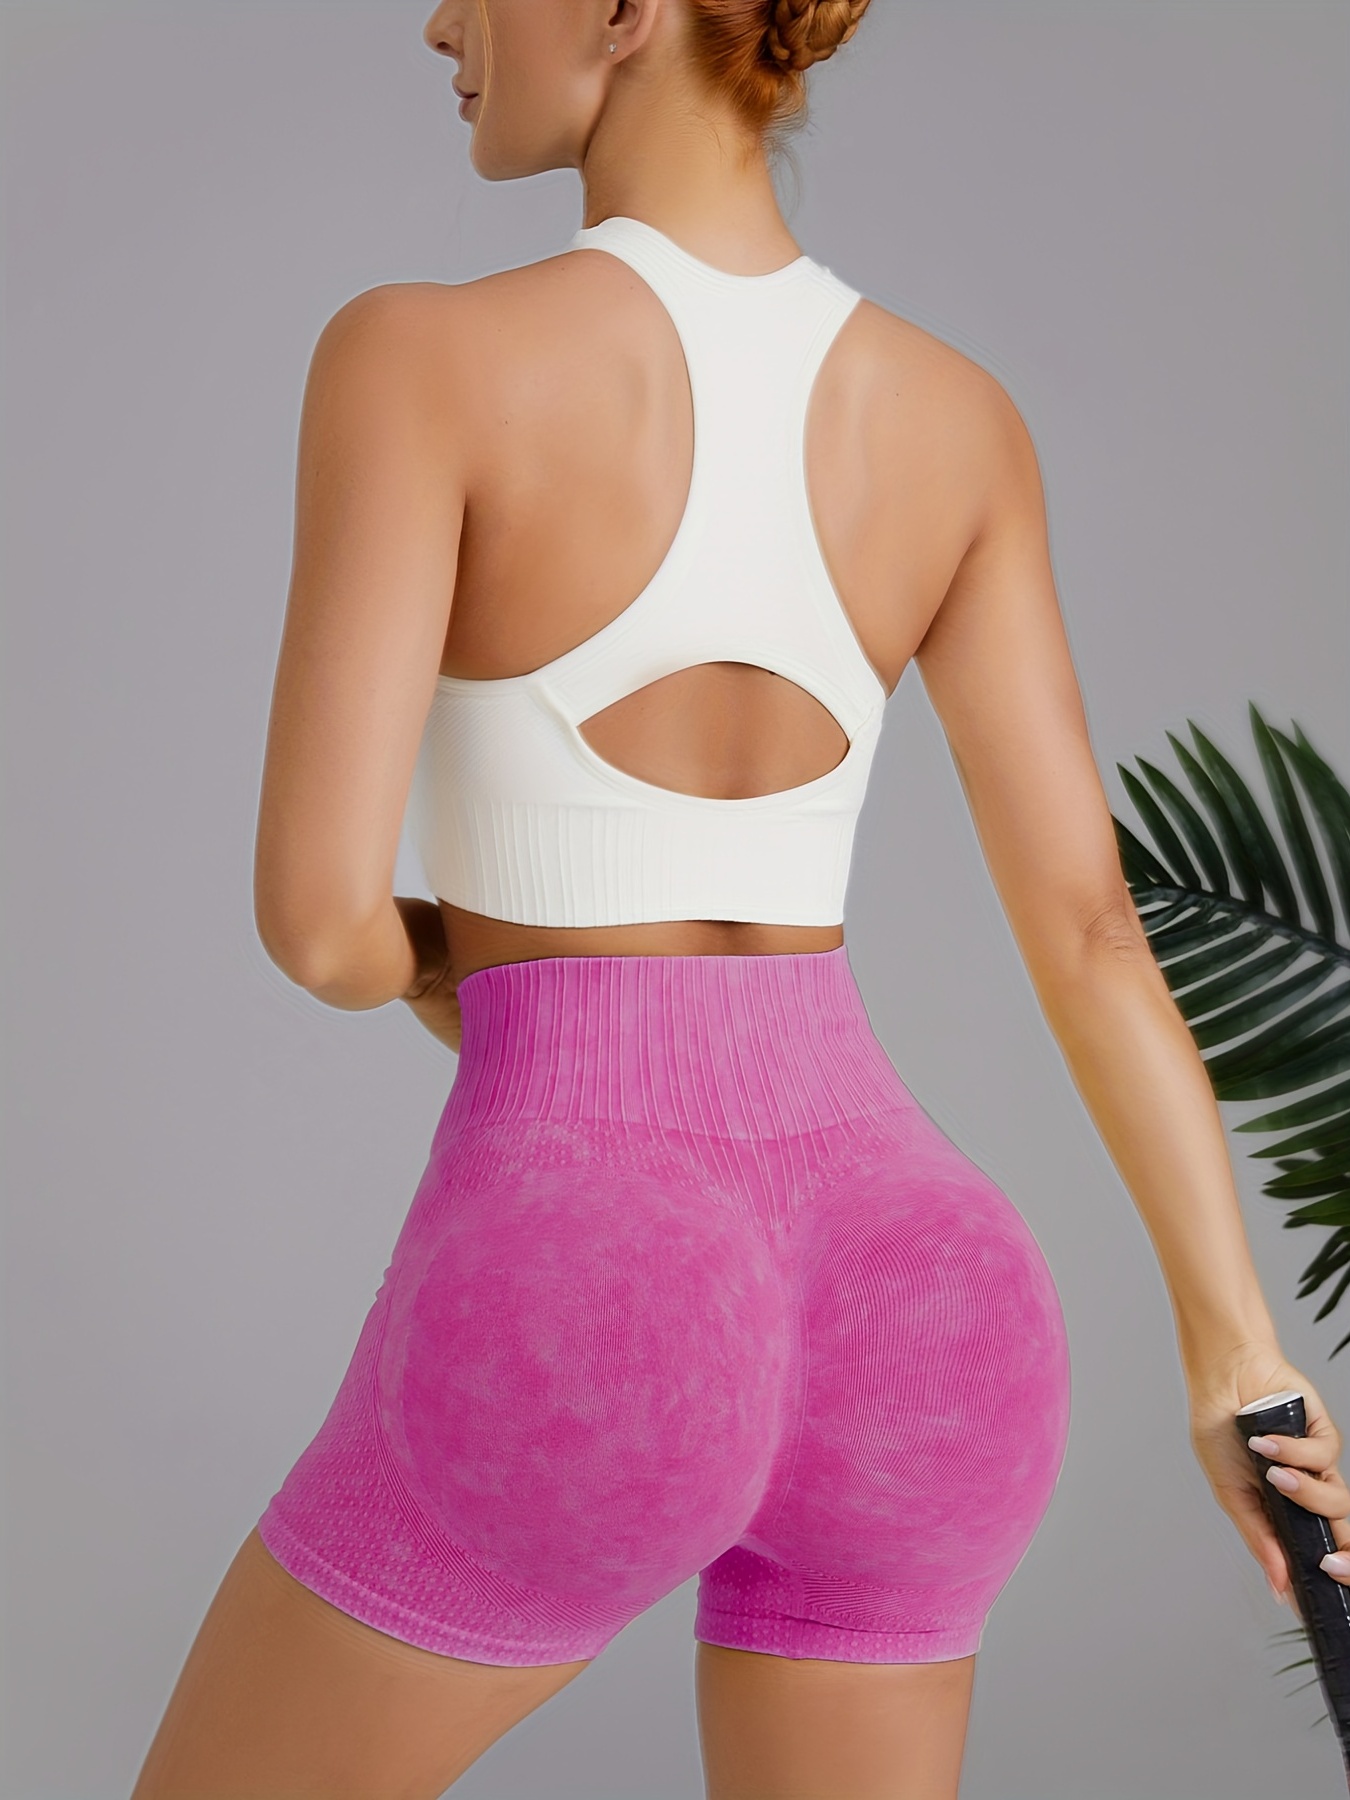 Workout Shorts Exclusive - Neon Pink